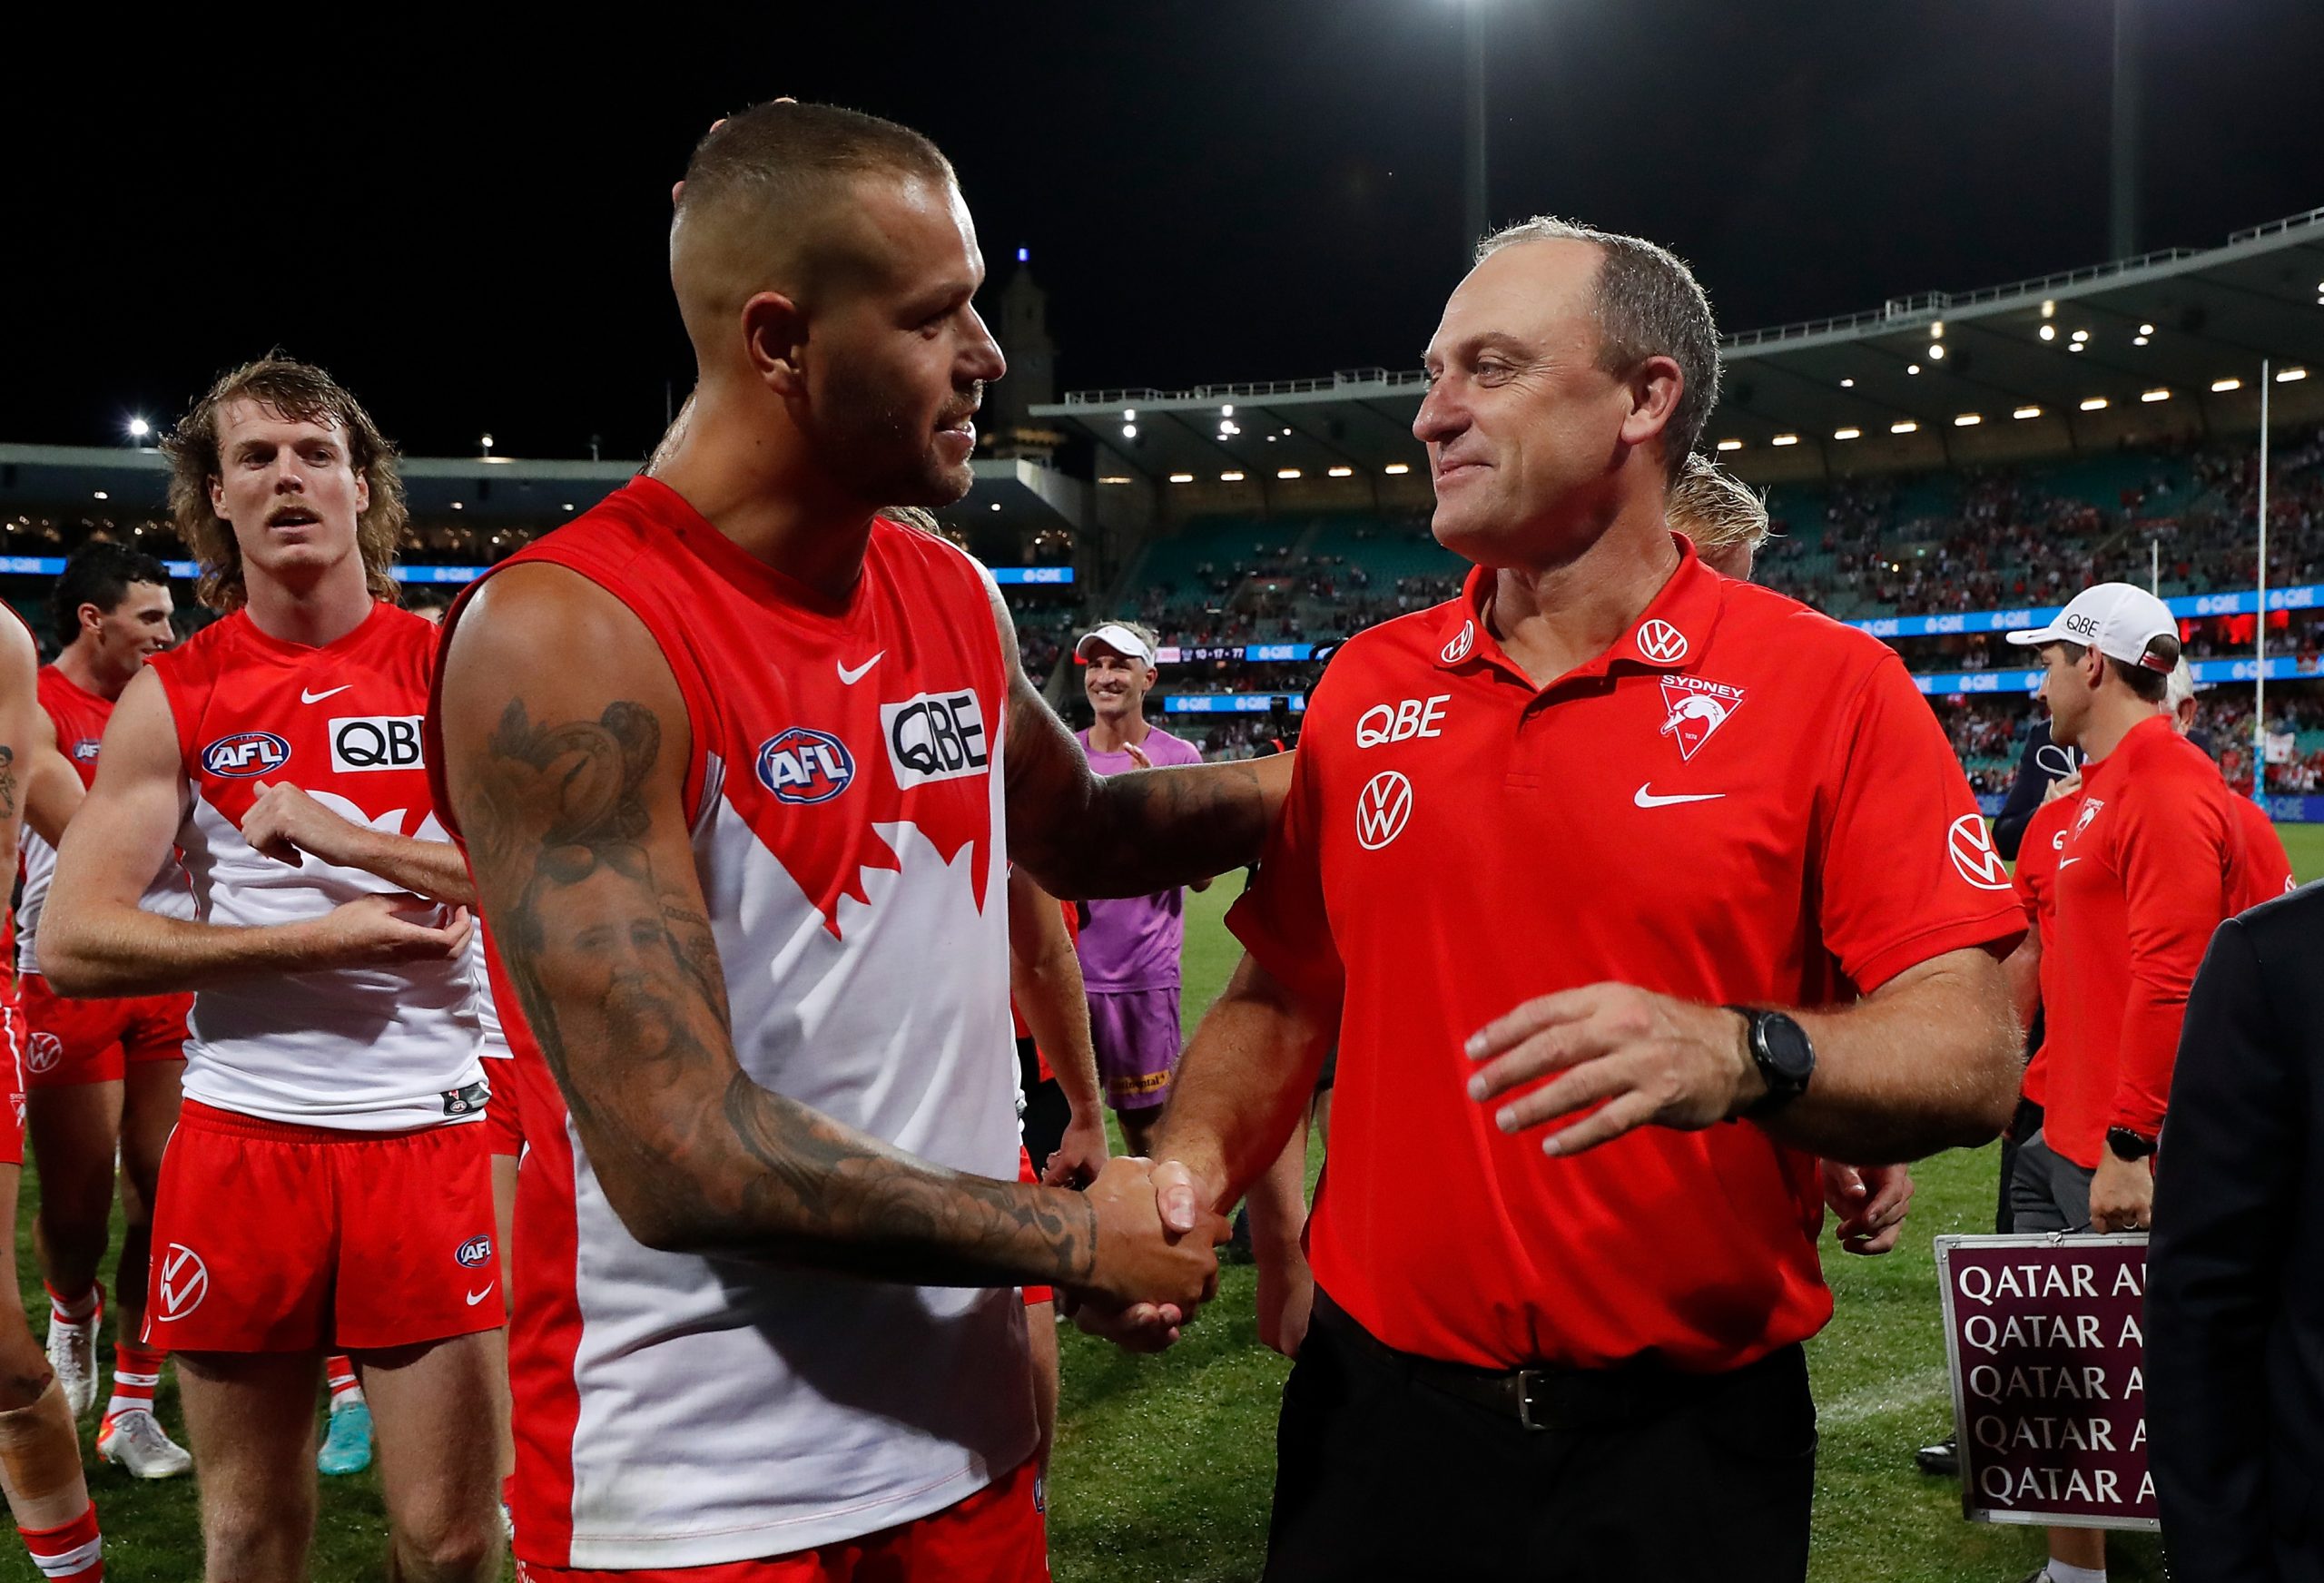 Sydney coach John Longmire says his relationship with Franklin was strong.